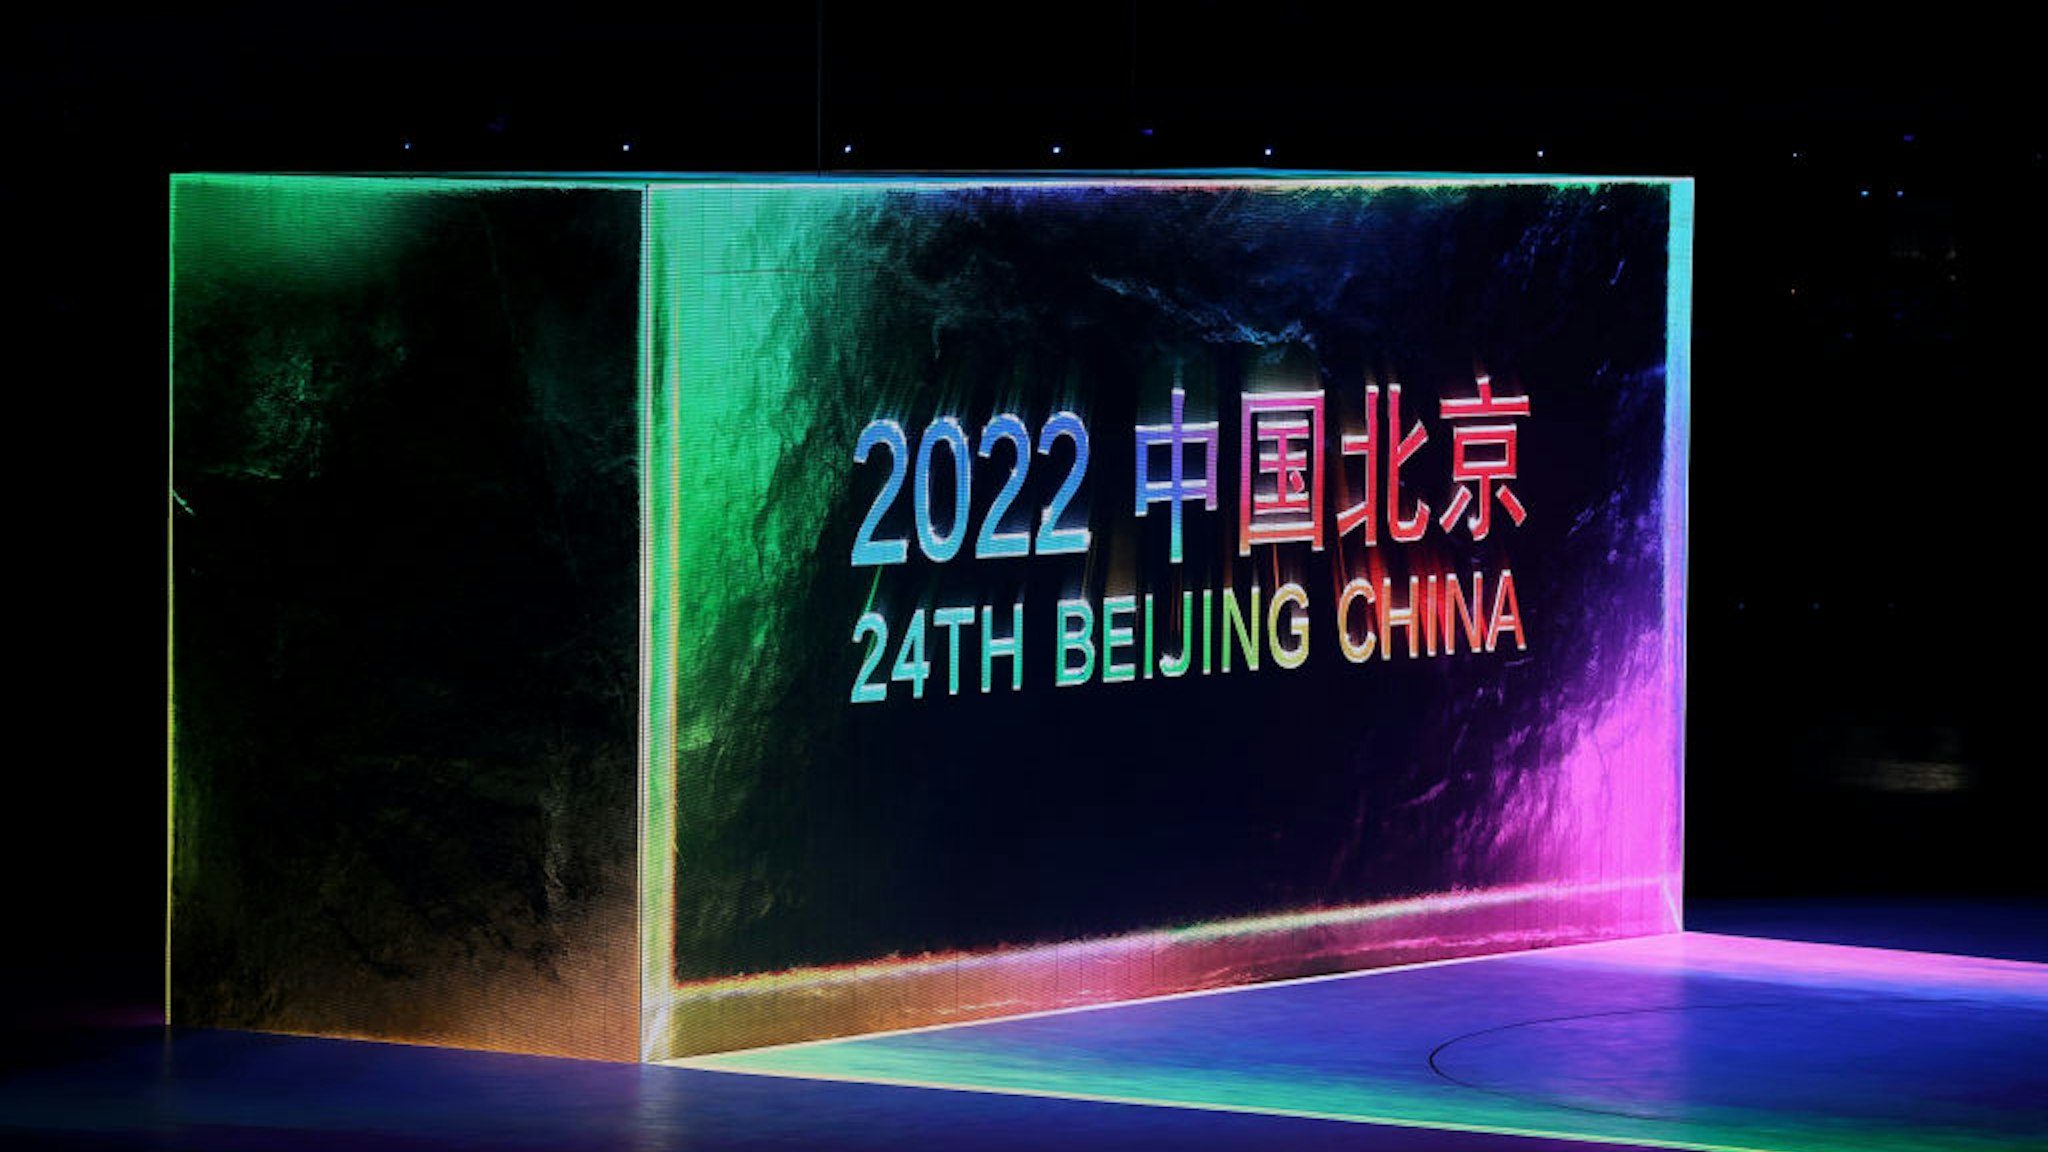 BEIJING, CHINA - FEBRUARY 04: A general view during the Opening Ceremony of the Beijing 2022 Winter Olympics at the Beijing National Stadium on February 04, 2022 in Beijing, China. (Photo by Julian Finney/Getty Images)